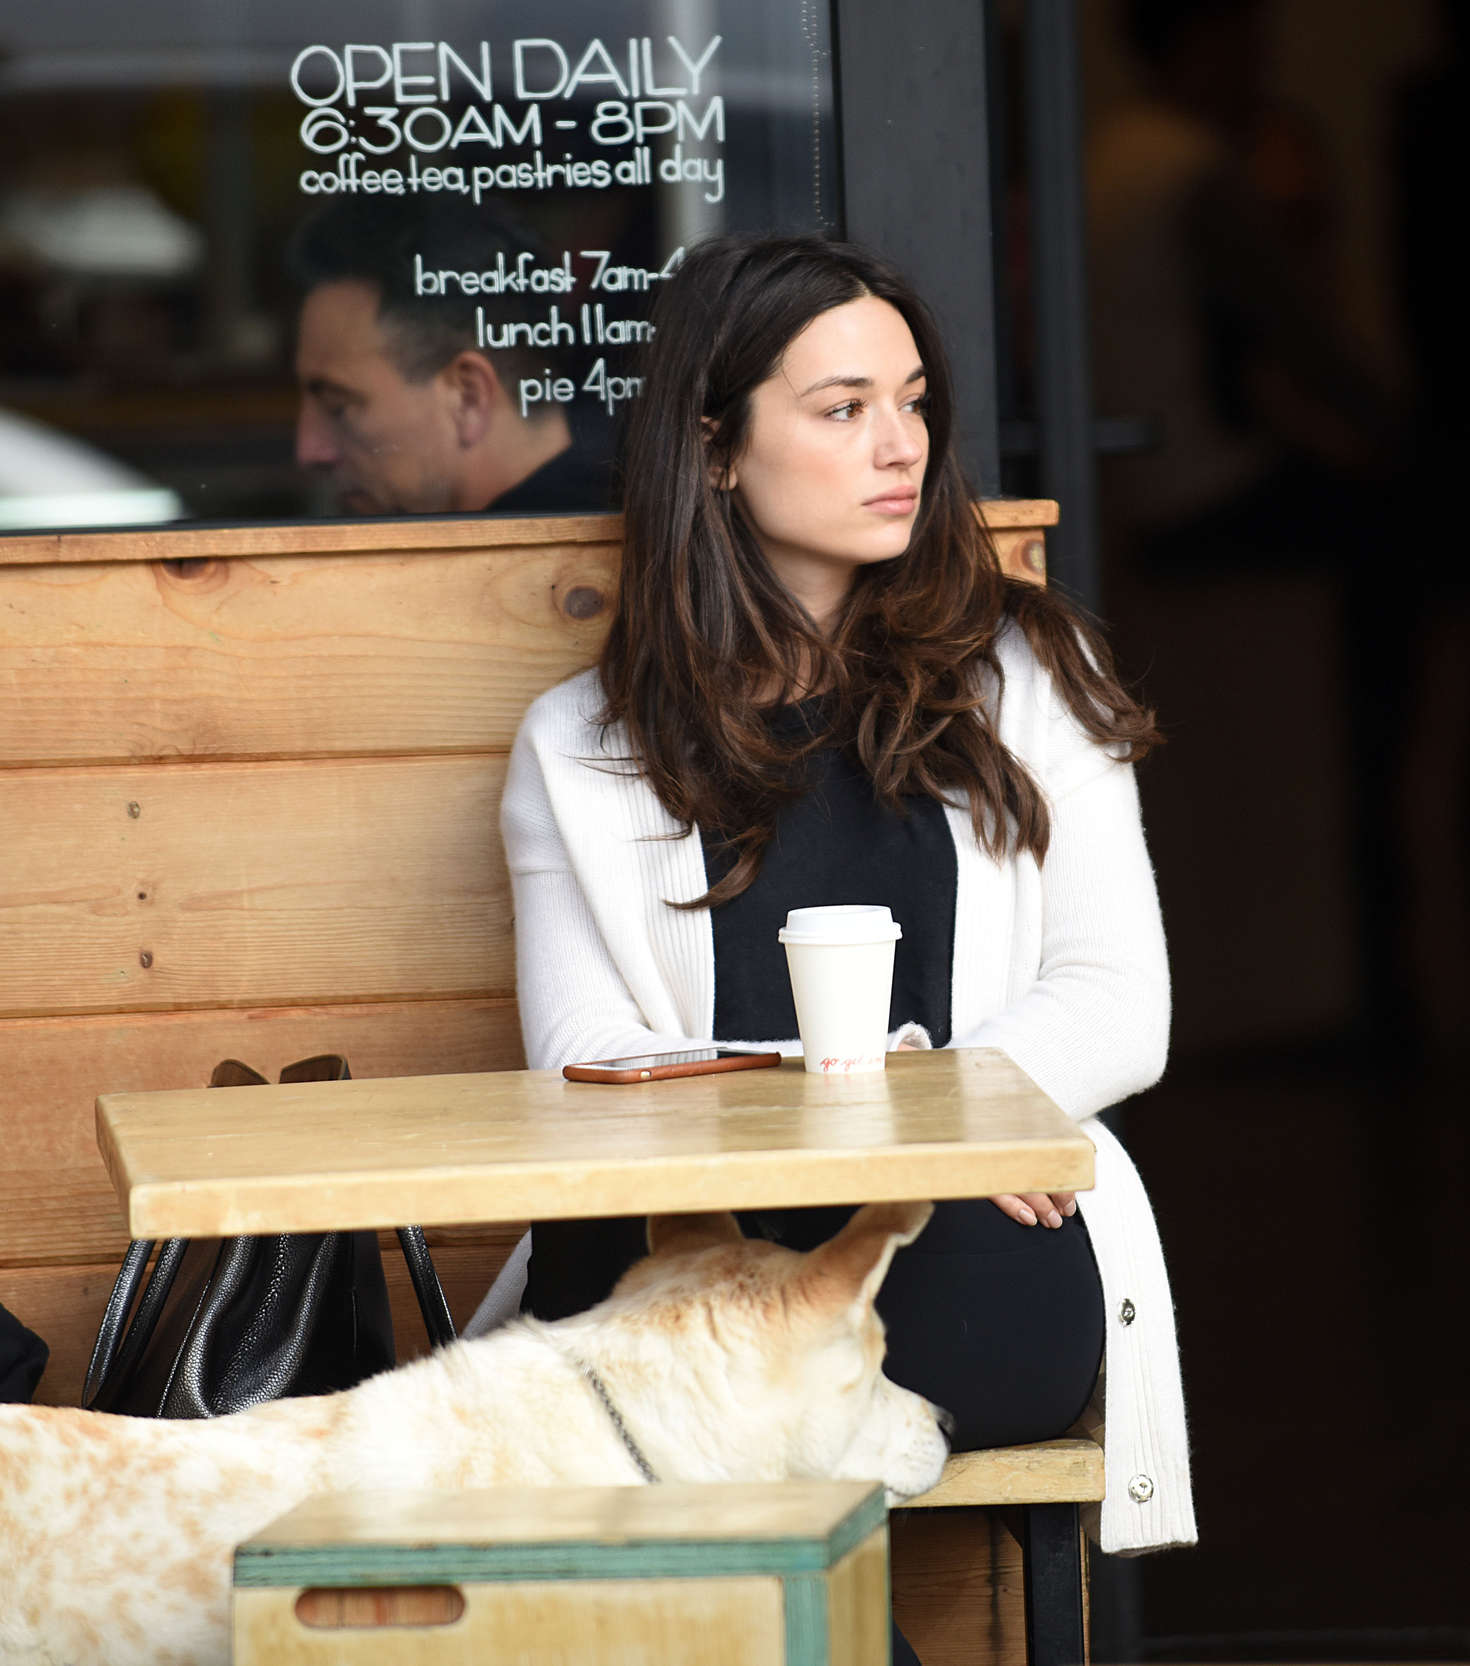 Crystal Reed out in Los Angeles